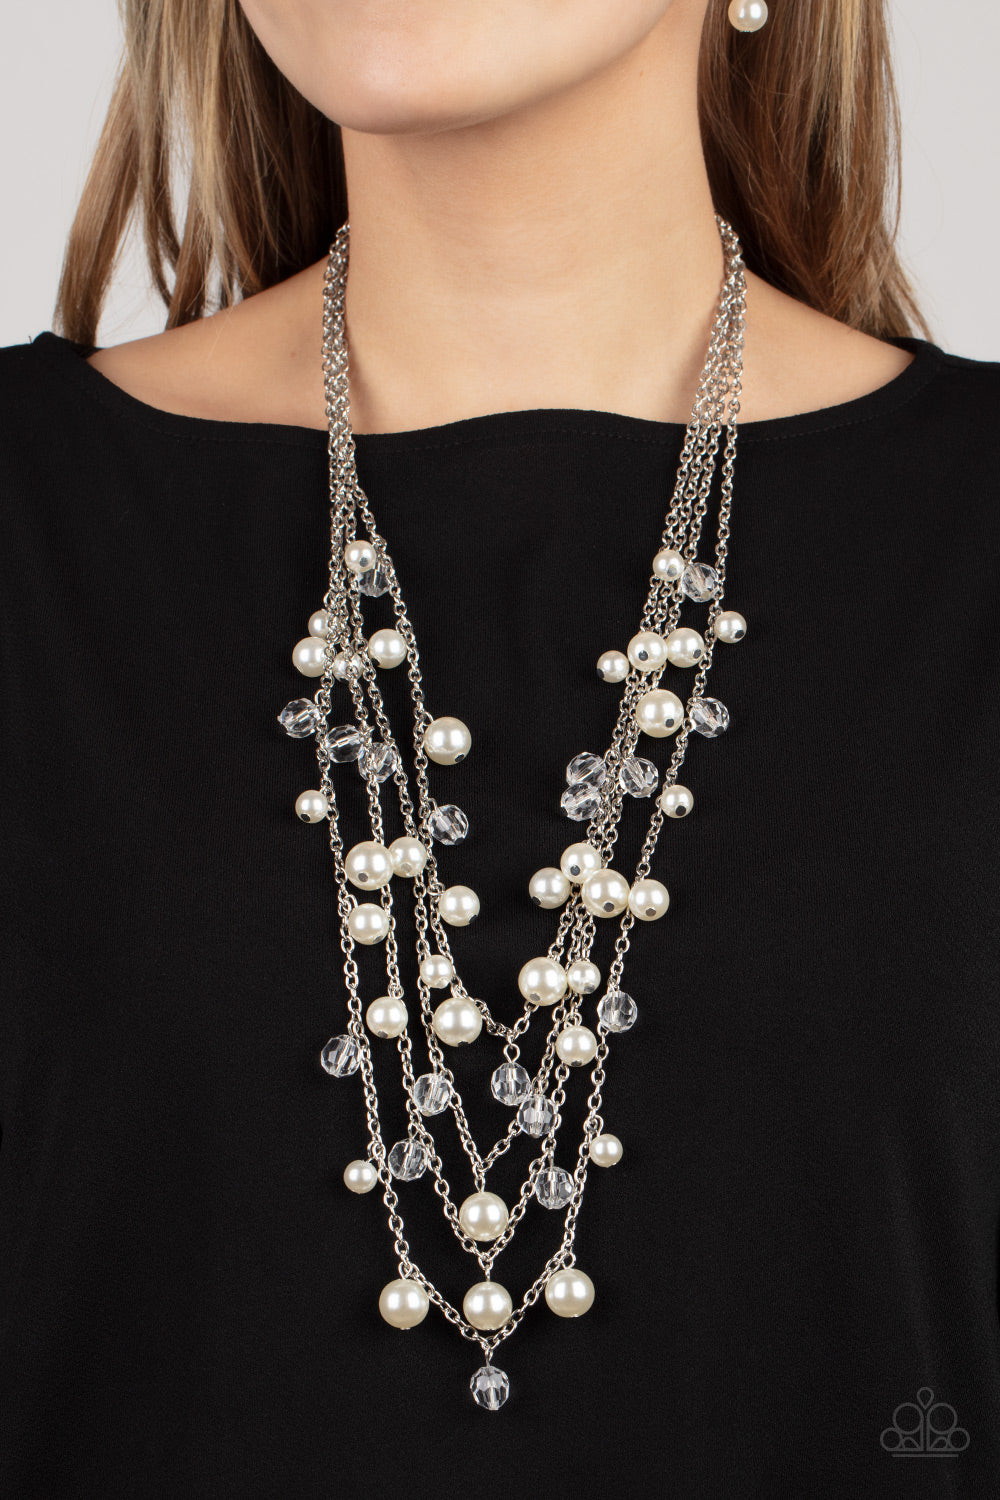 Vintage Virtuoso - White Pearl and Silver Necklace - Paparazzi Accessories -Row after row of bubbly white pearls and glittery crystal-like beads swing from layered silver chains across the chest, creating a noise-making display. Features an adjustable clasp closure. Sold as one individual necklace. 